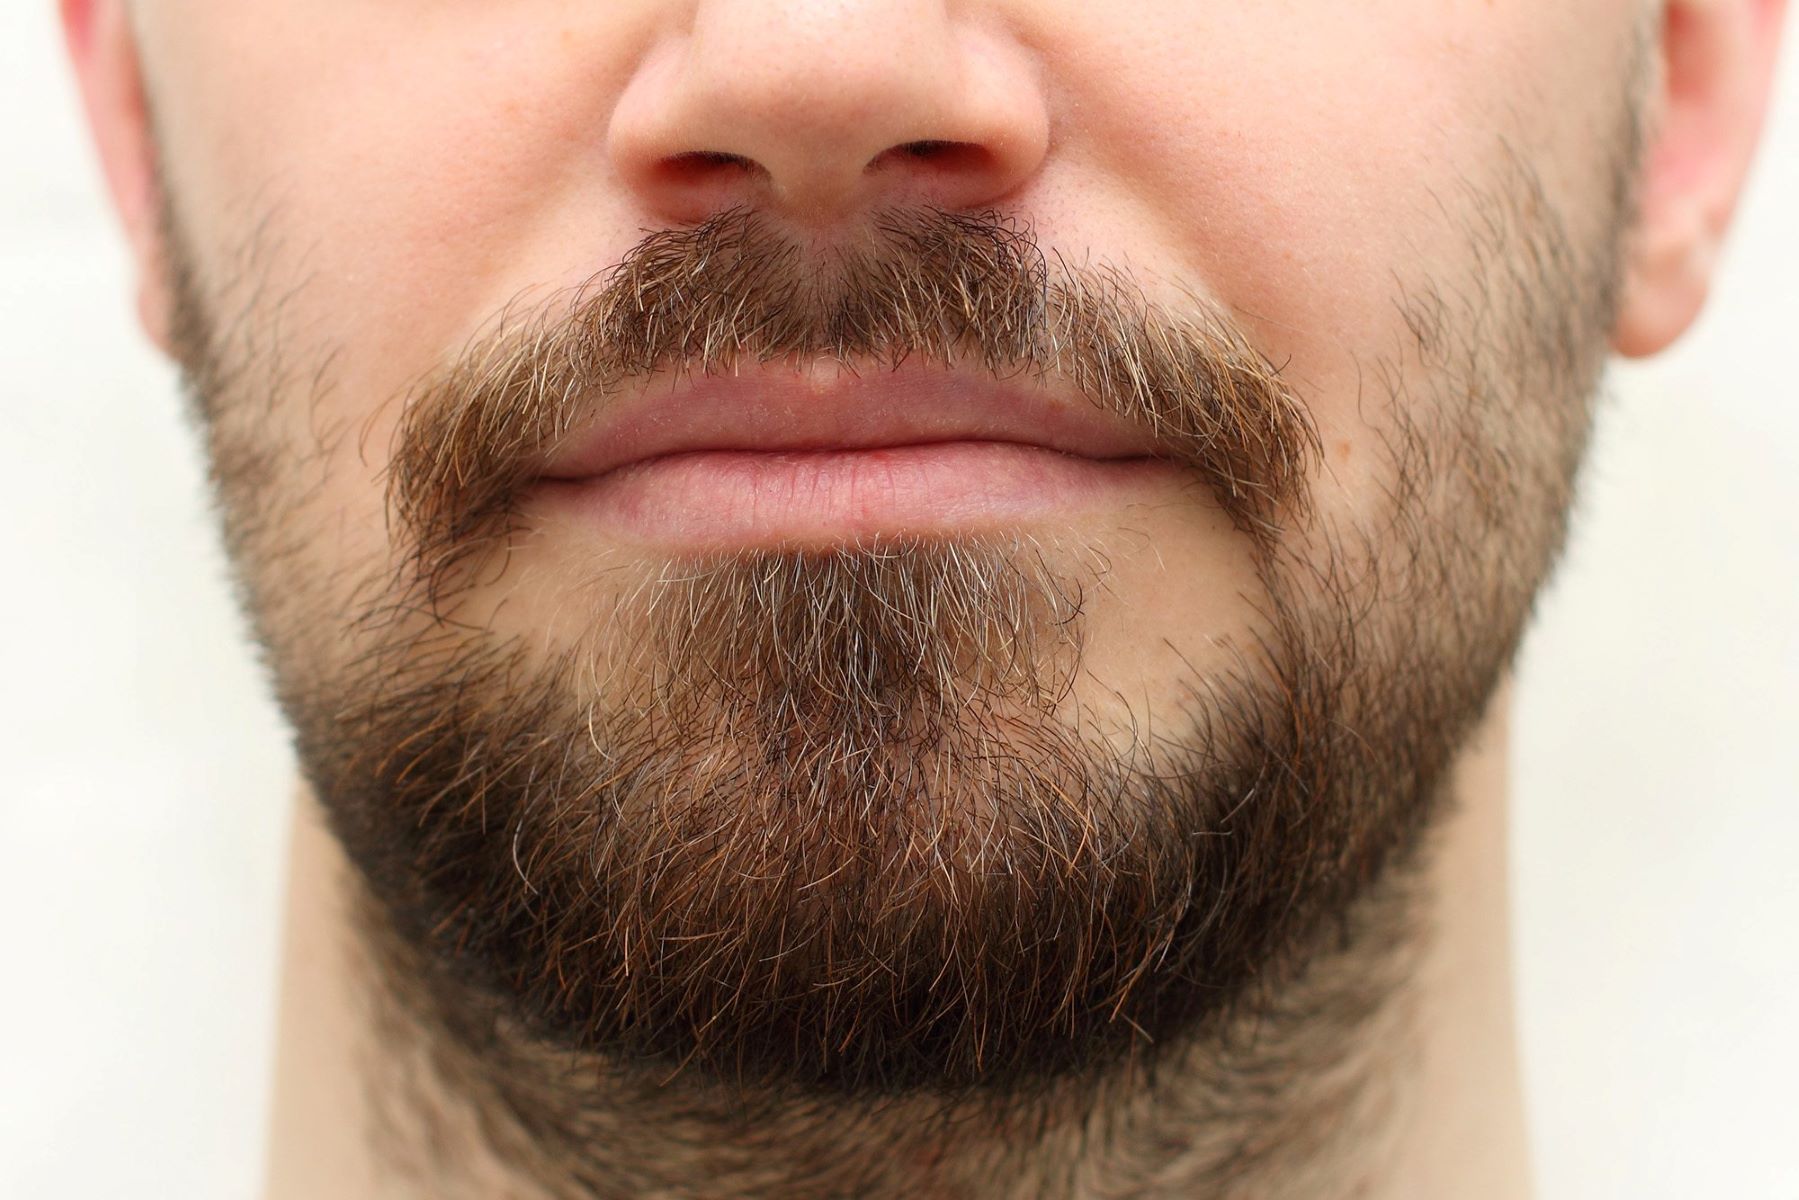 21-year-old's Facial Hair Transformation: From Chinstrap To Full Beard!